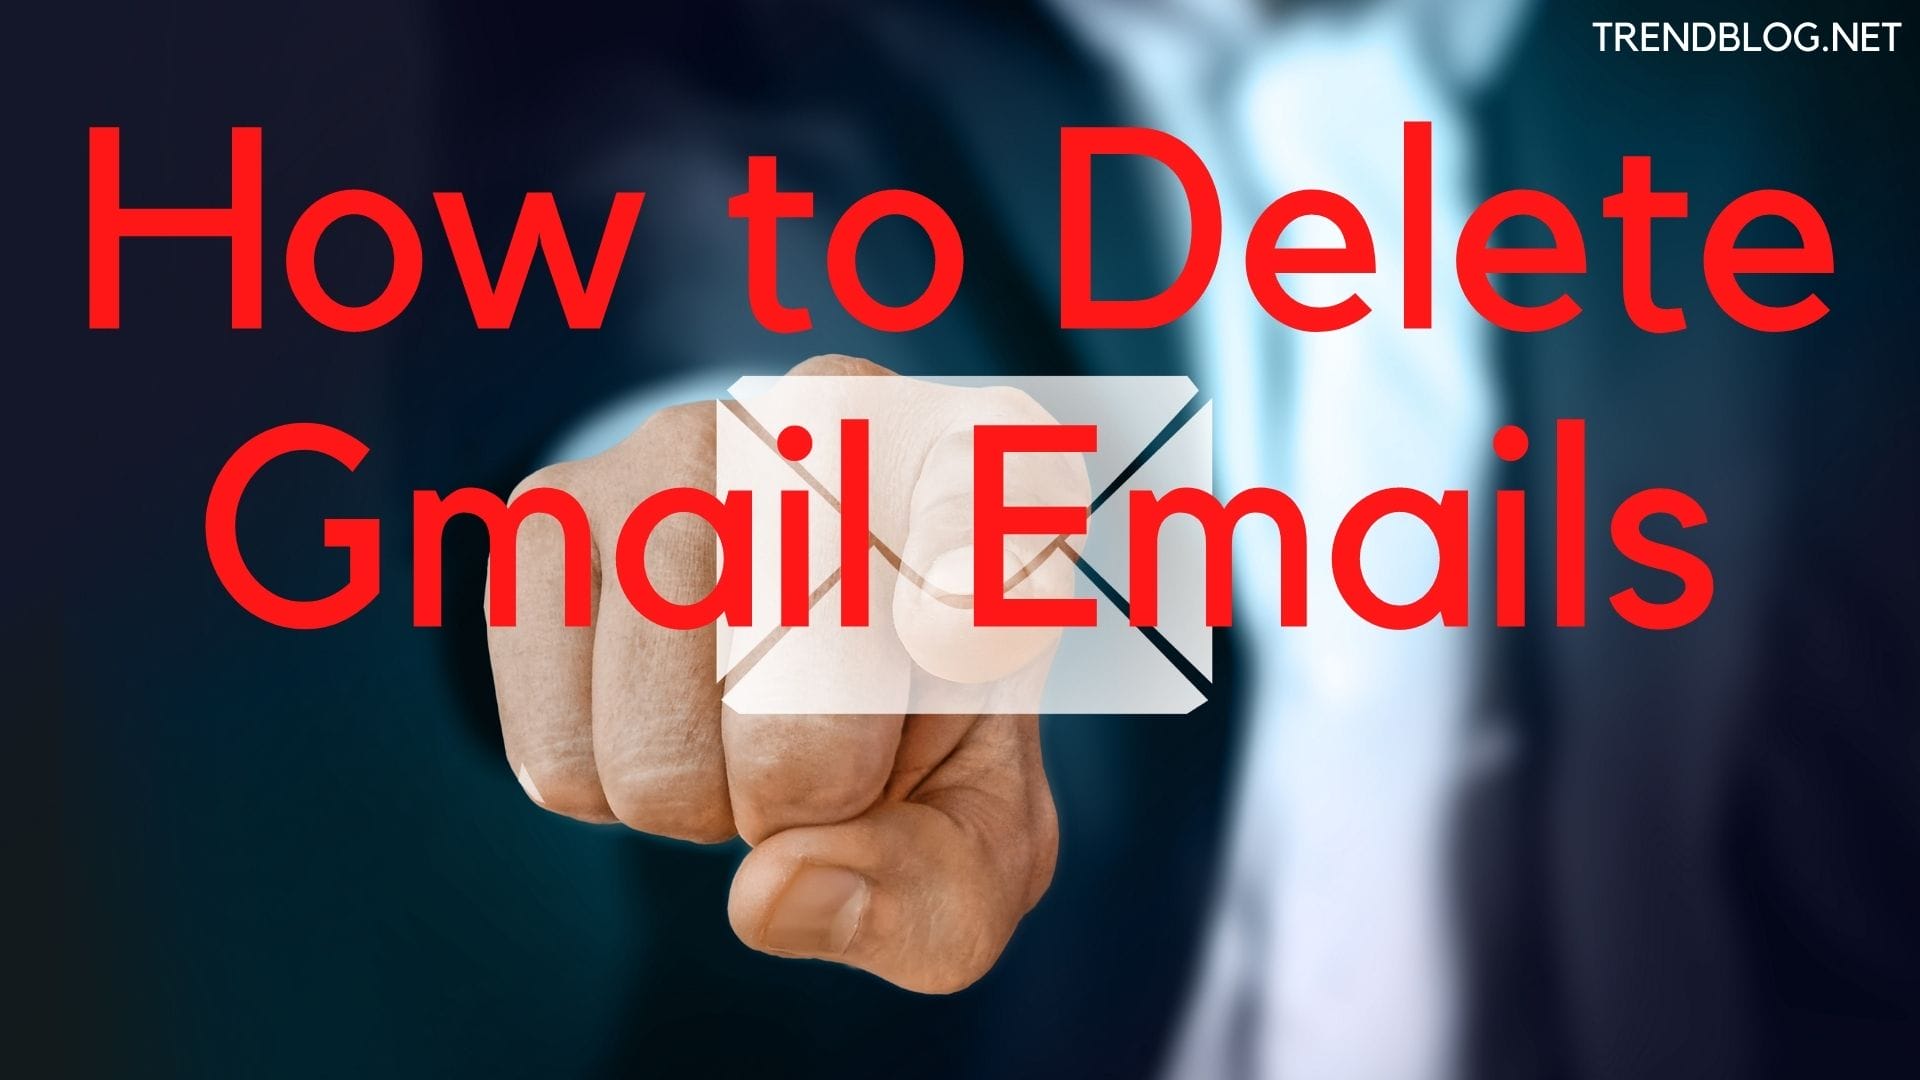 How to Delete Gmail Emails